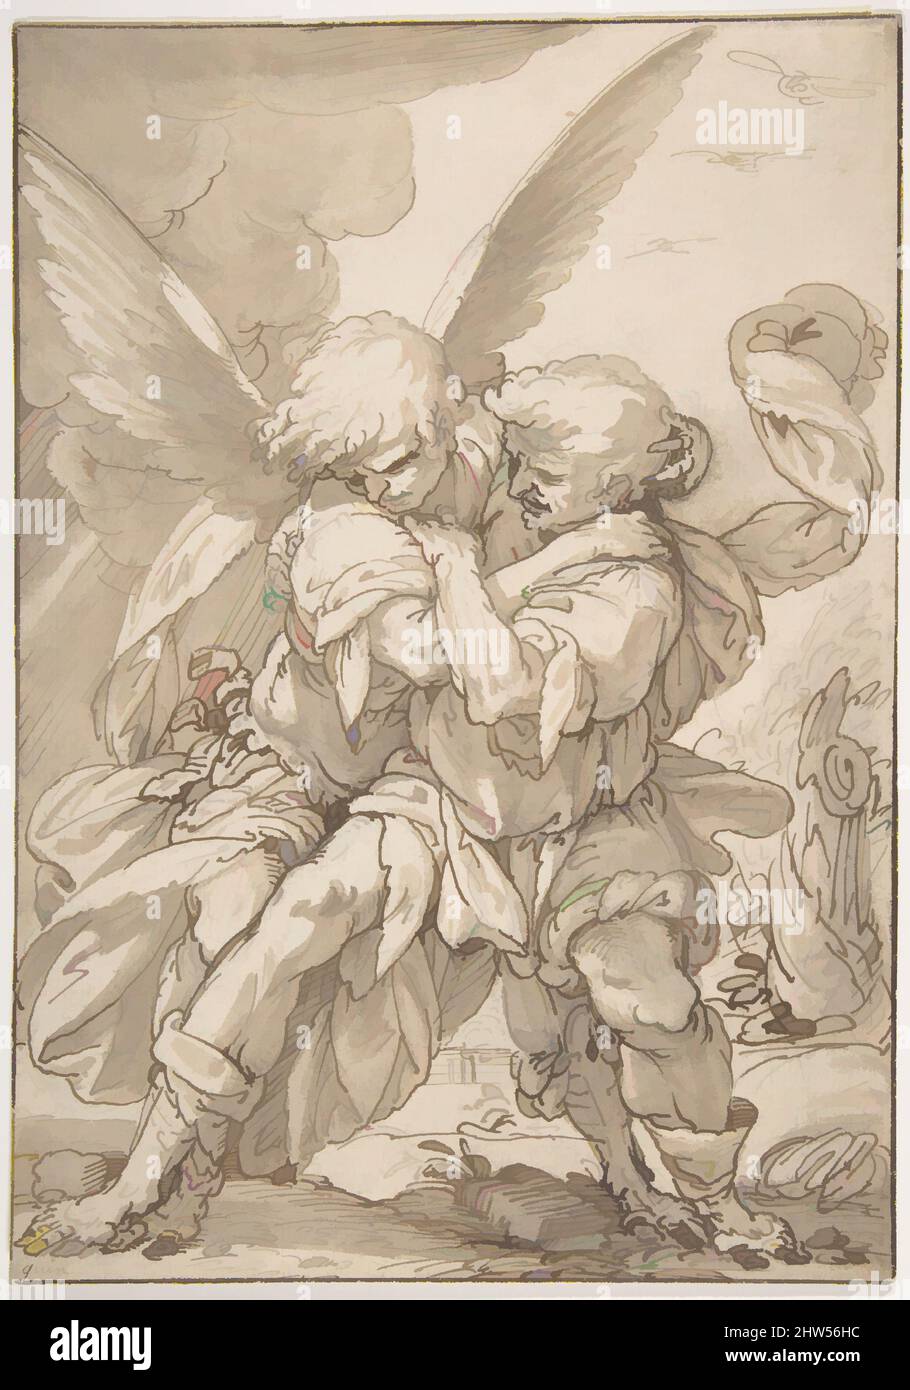 Art inspired by Jacob Wrestling with the Angel, 1601–68, Pen and brown ink, brush and brown wash over traces of black chalk, 10 3/4 x 7 9/16in. (27.3 x 19.2cm), Drawings, attributed to Giulio Benso (Italian, Pieve di Teco 1592–1668 Pieve di Teco, Classic works modernized by Artotop with a splash of modernity. Shapes, color and value, eye-catching visual impact on art. Emotions through freedom of artworks in a contemporary way. A timeless message pursuing a wildly creative new direction. Artists turning to the digital medium and creating the Artotop NFT Stock Photo